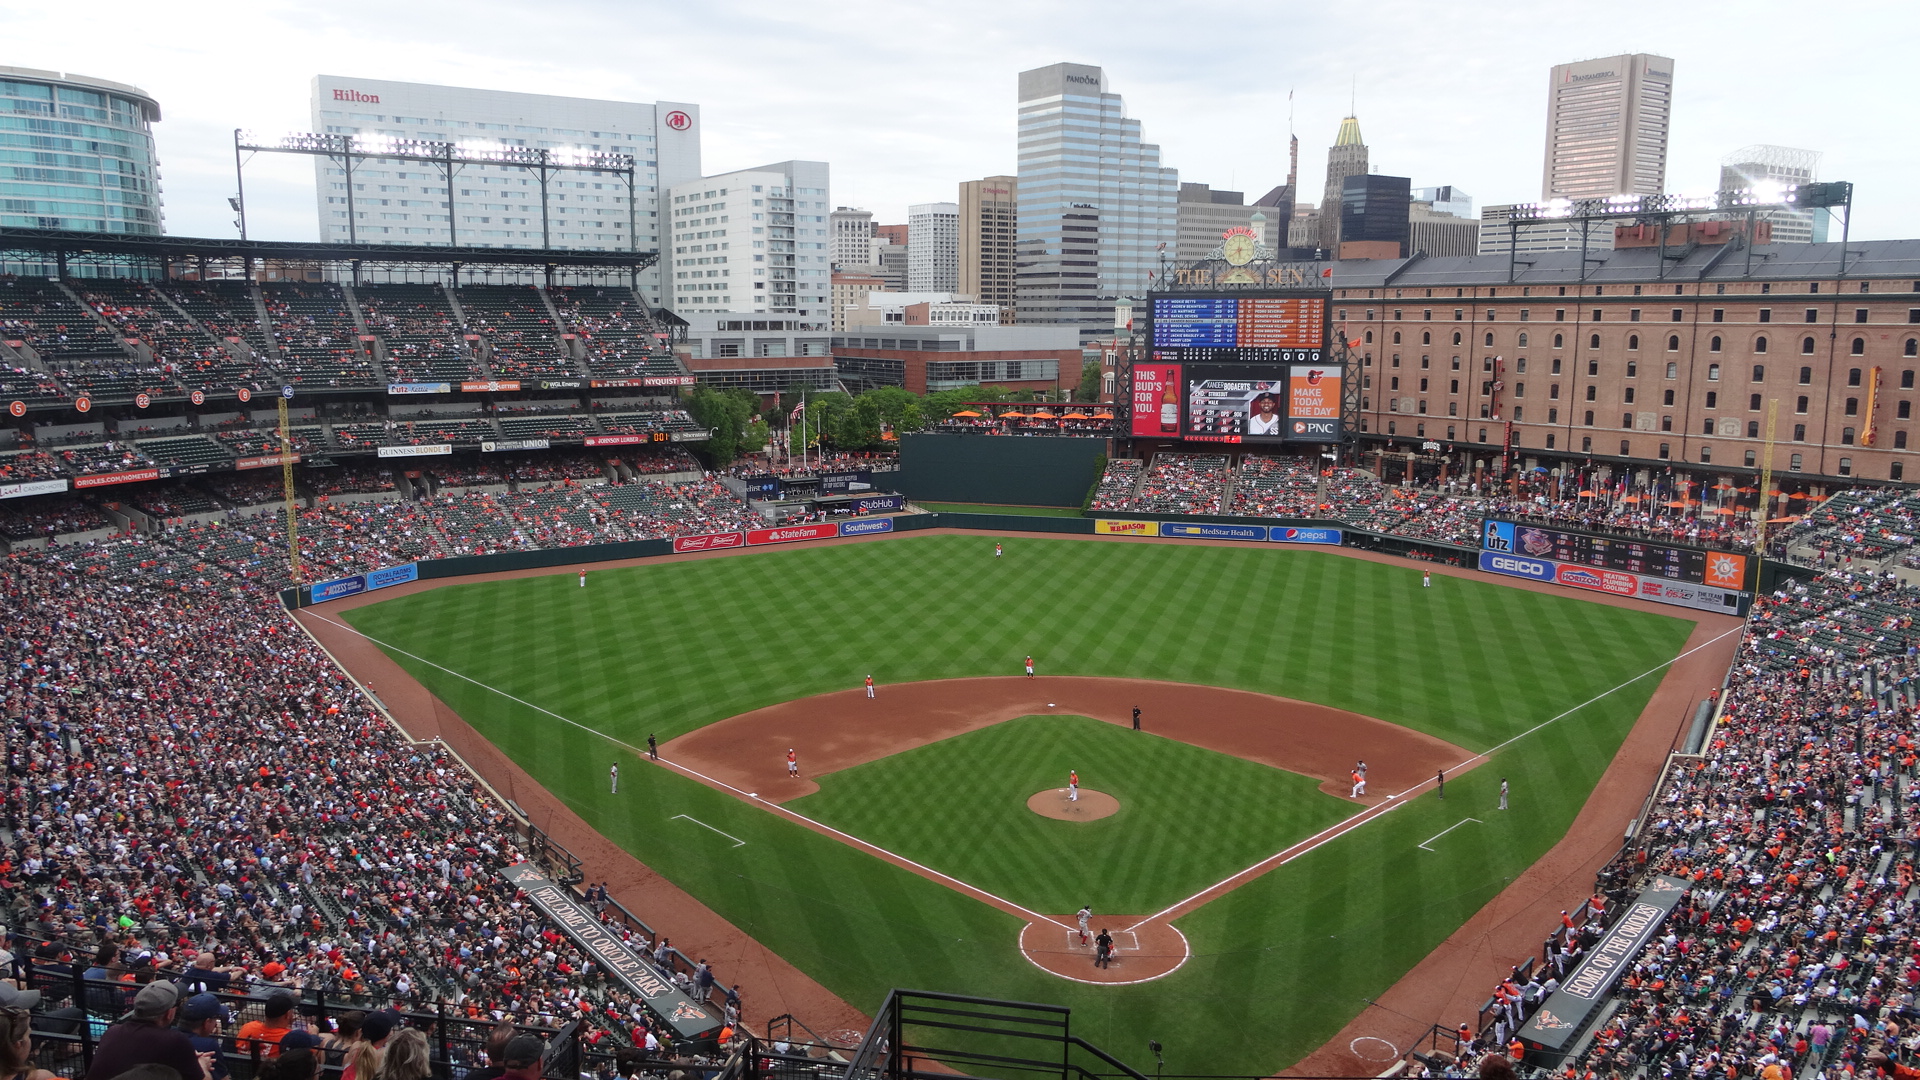 Oriole Park at Camden Yards 2019